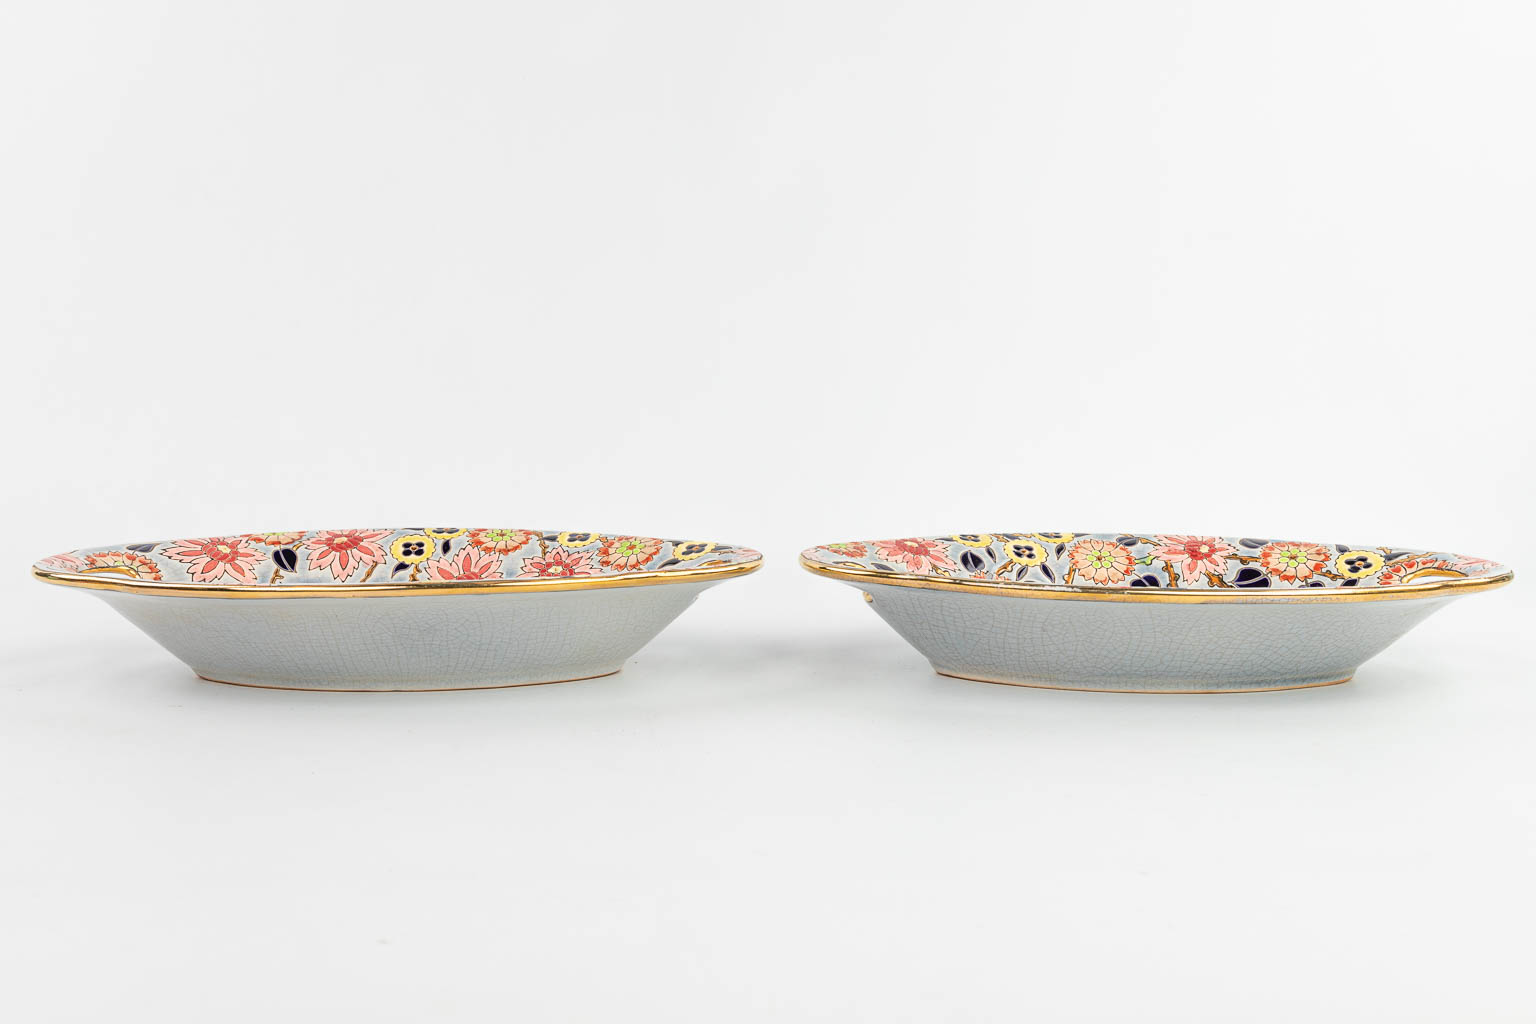 A collection of 15 items made of ceramics by Longwy and in the style of Longwy. 